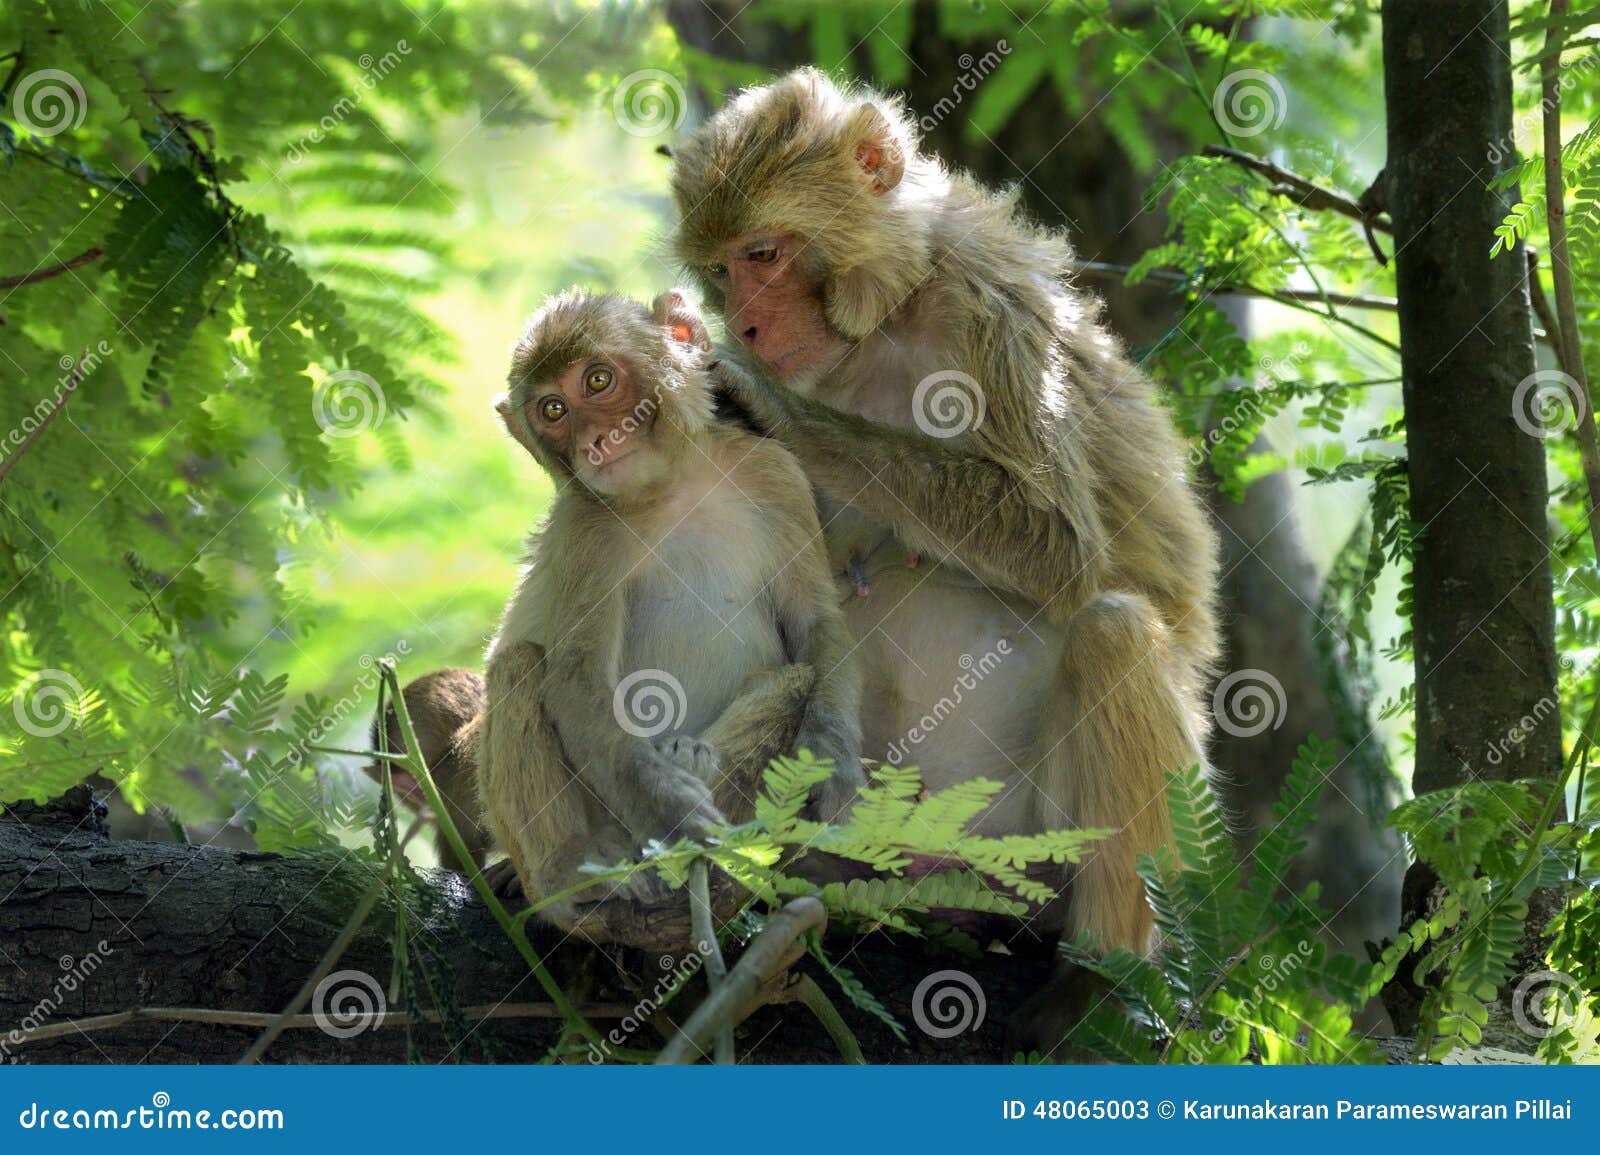 rhesus macaques-mother picking louse